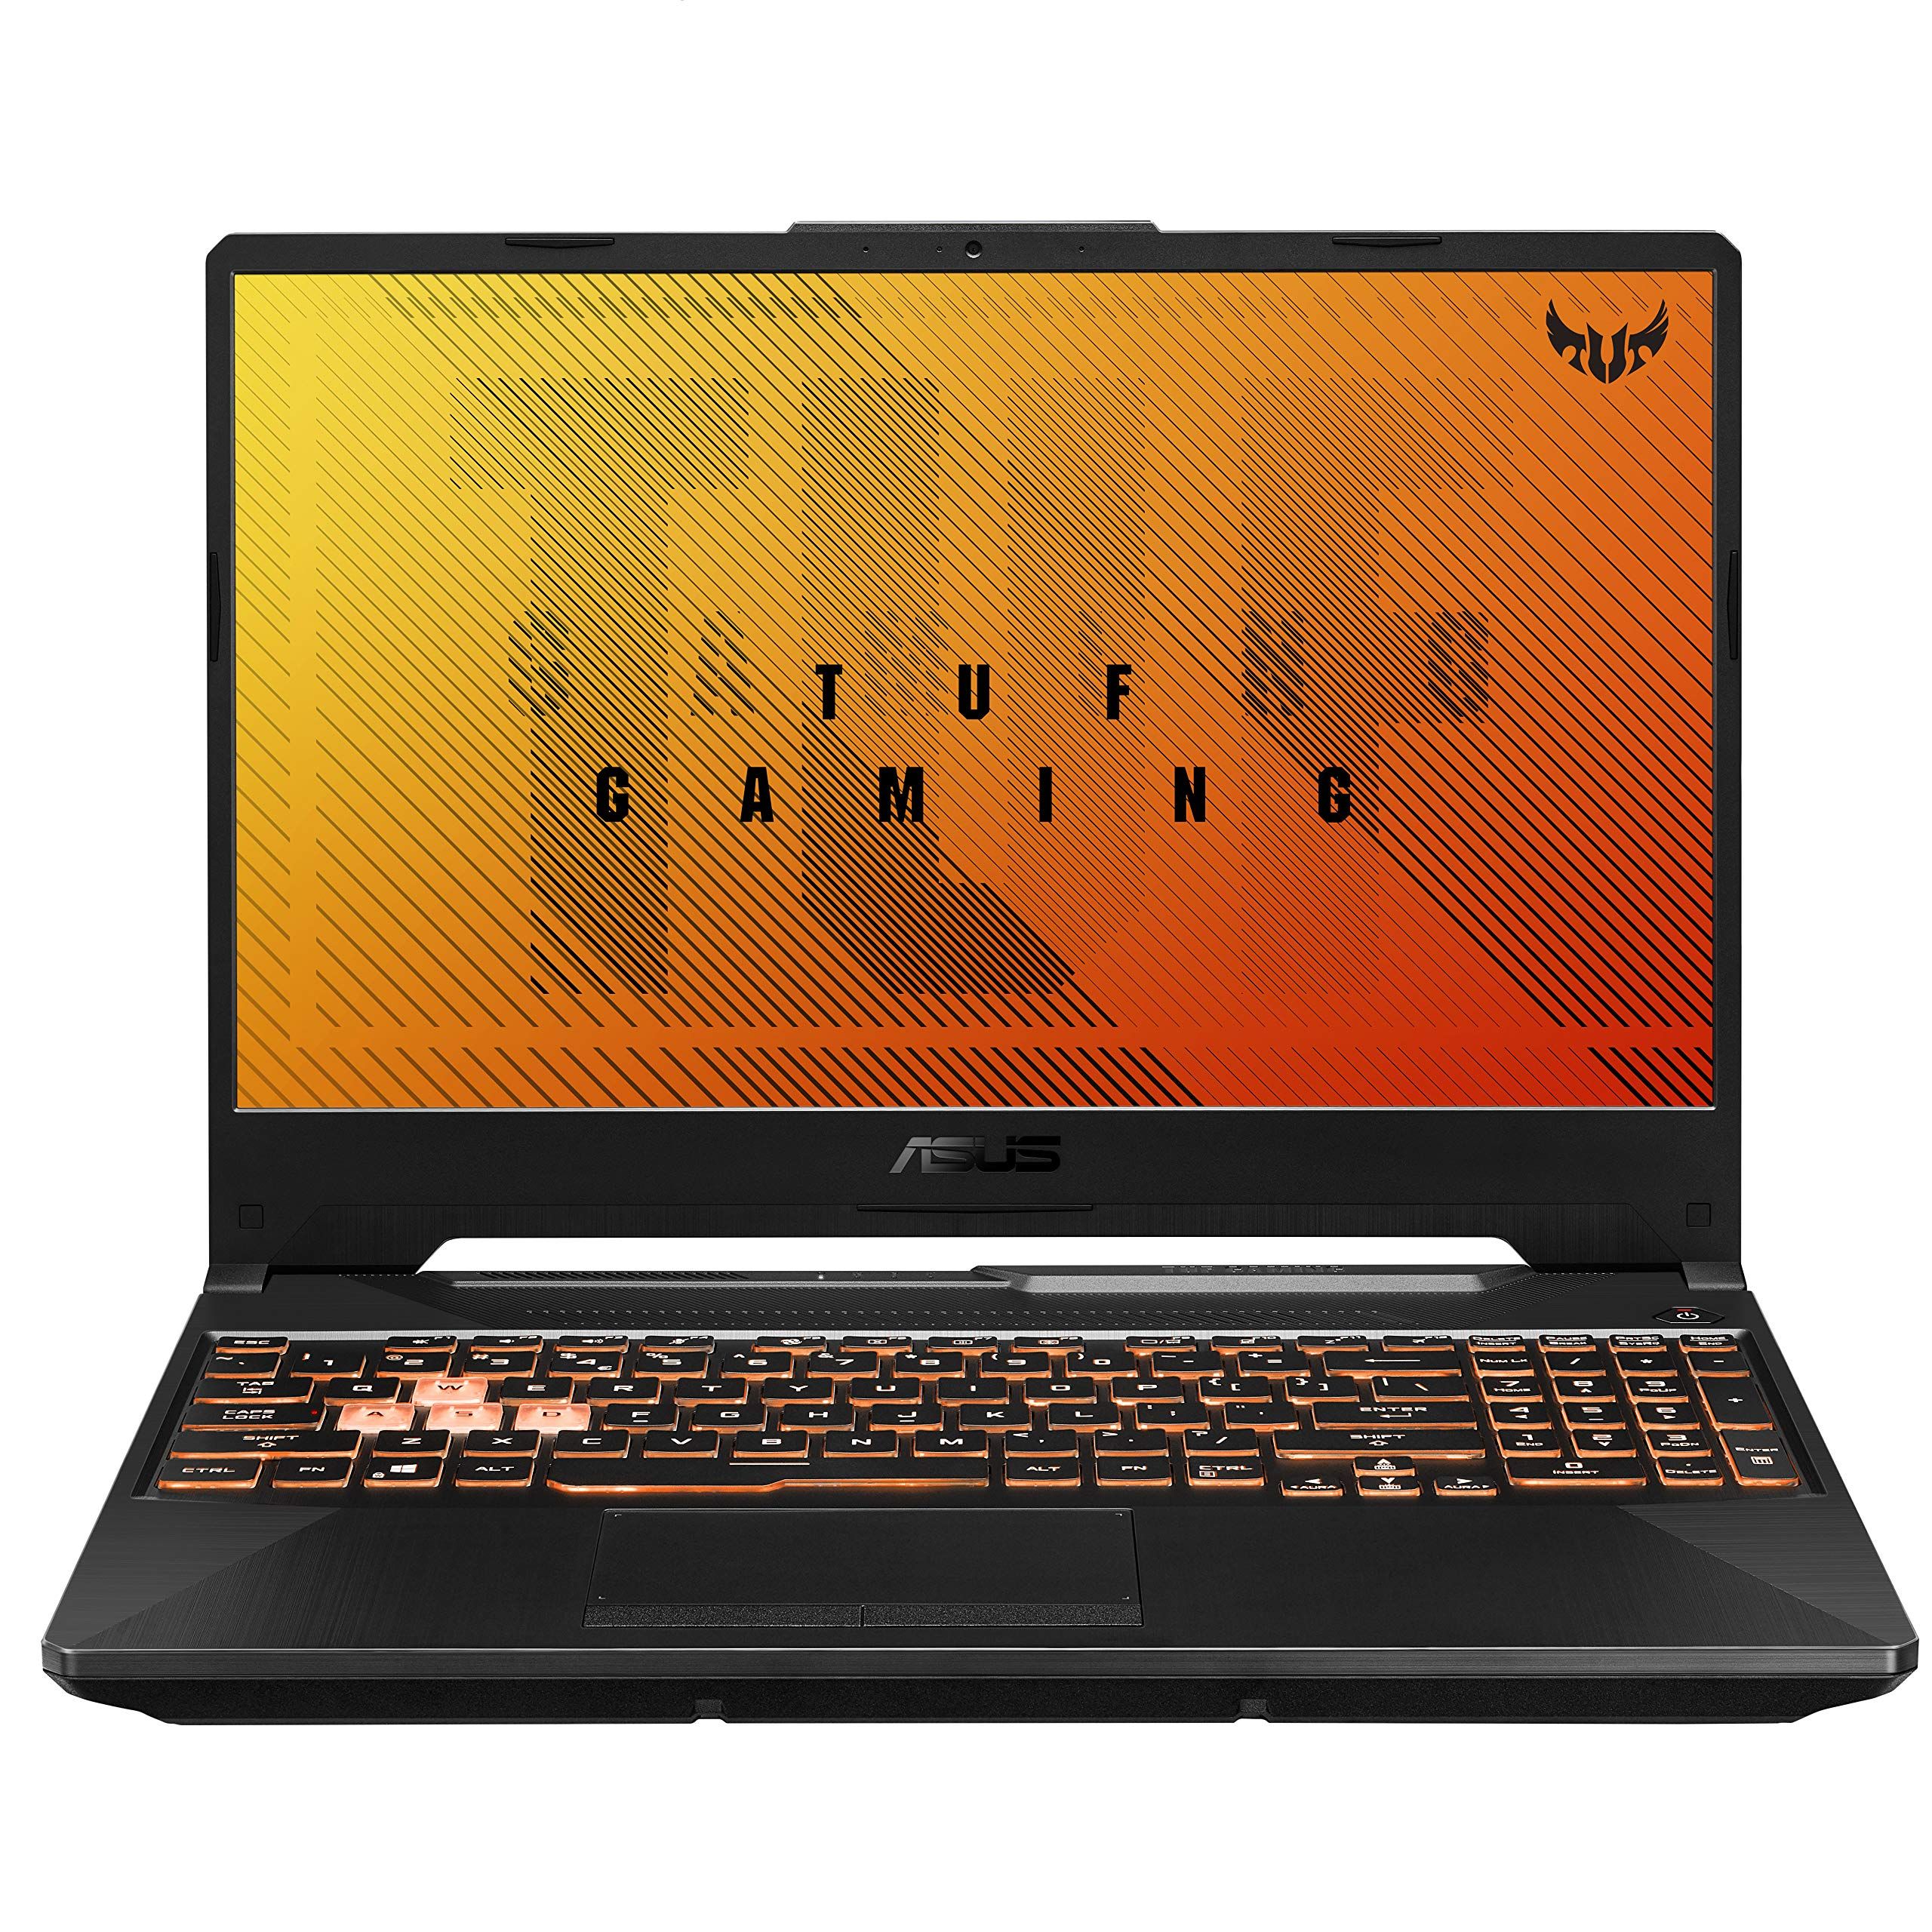 Laptop Gaming ASUS ROG TUF A15, FX507ZC4-HN291, 15.6-inch, FHD (1920 x 1080) 16:9, 12th Gen Intel® Core™ i5-12500H Processor 2.5 GHz (18M Cache, up to 4.5 GHz, 12 cores: 4 P-cores and 8 E-cores), NVIDIA® GeForce RTX™ 3050 Laptop GPU, 144Hz, DDR4 16GB, 512GB PCIe® 3.0 NVMe™ M.2 SSD, 250nits_4